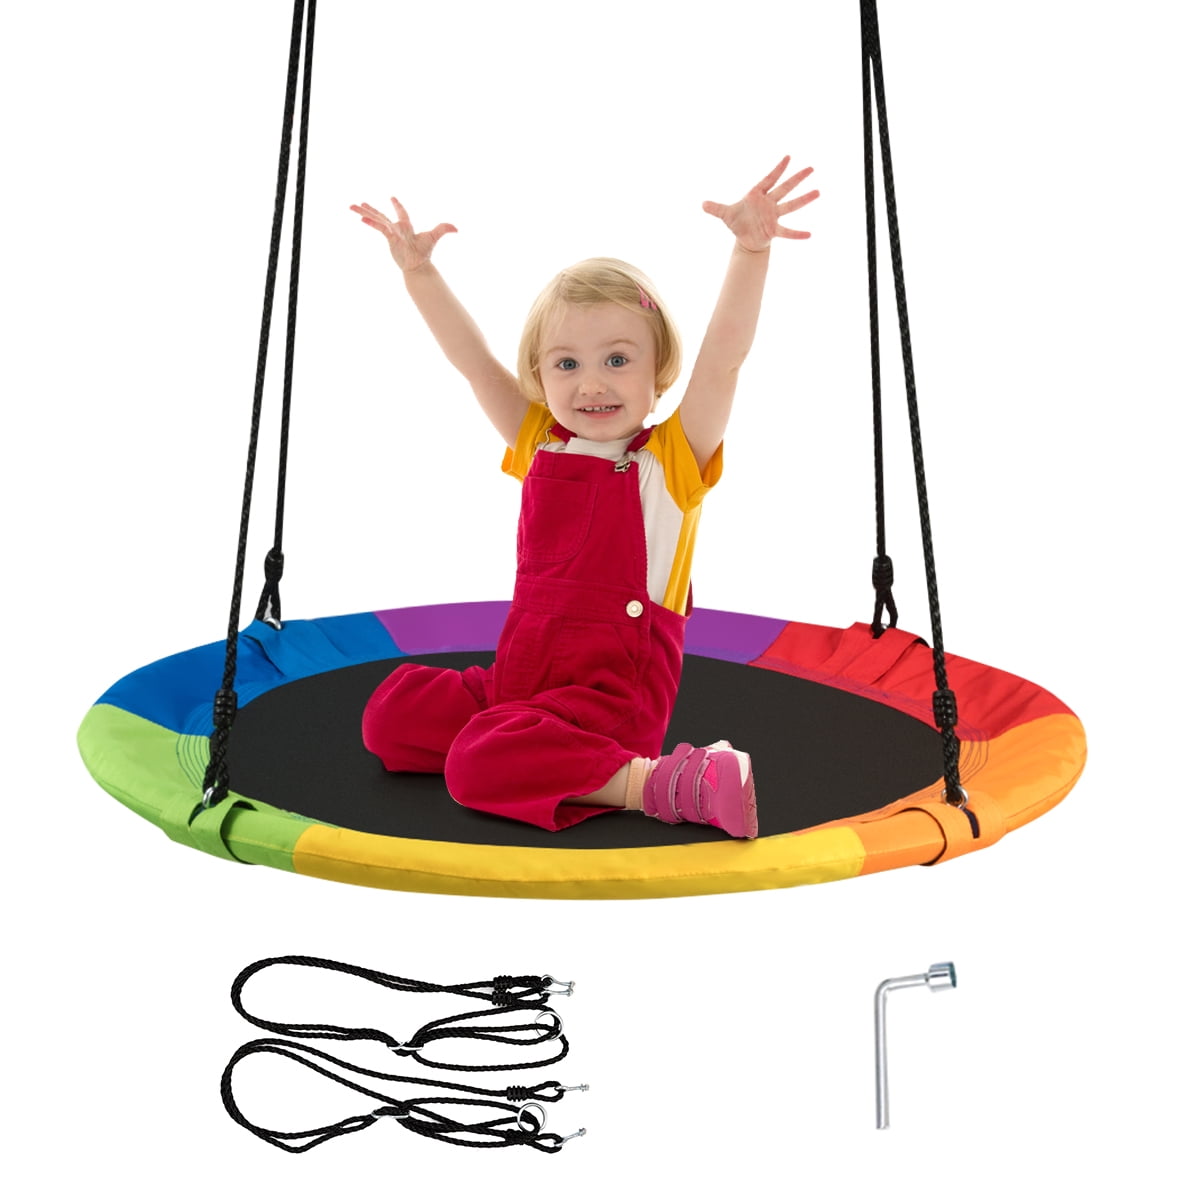 40" Indoor/Outdoor Tree Swing Round Saucer Swing Seat Heavy Duty for Kids Adults 